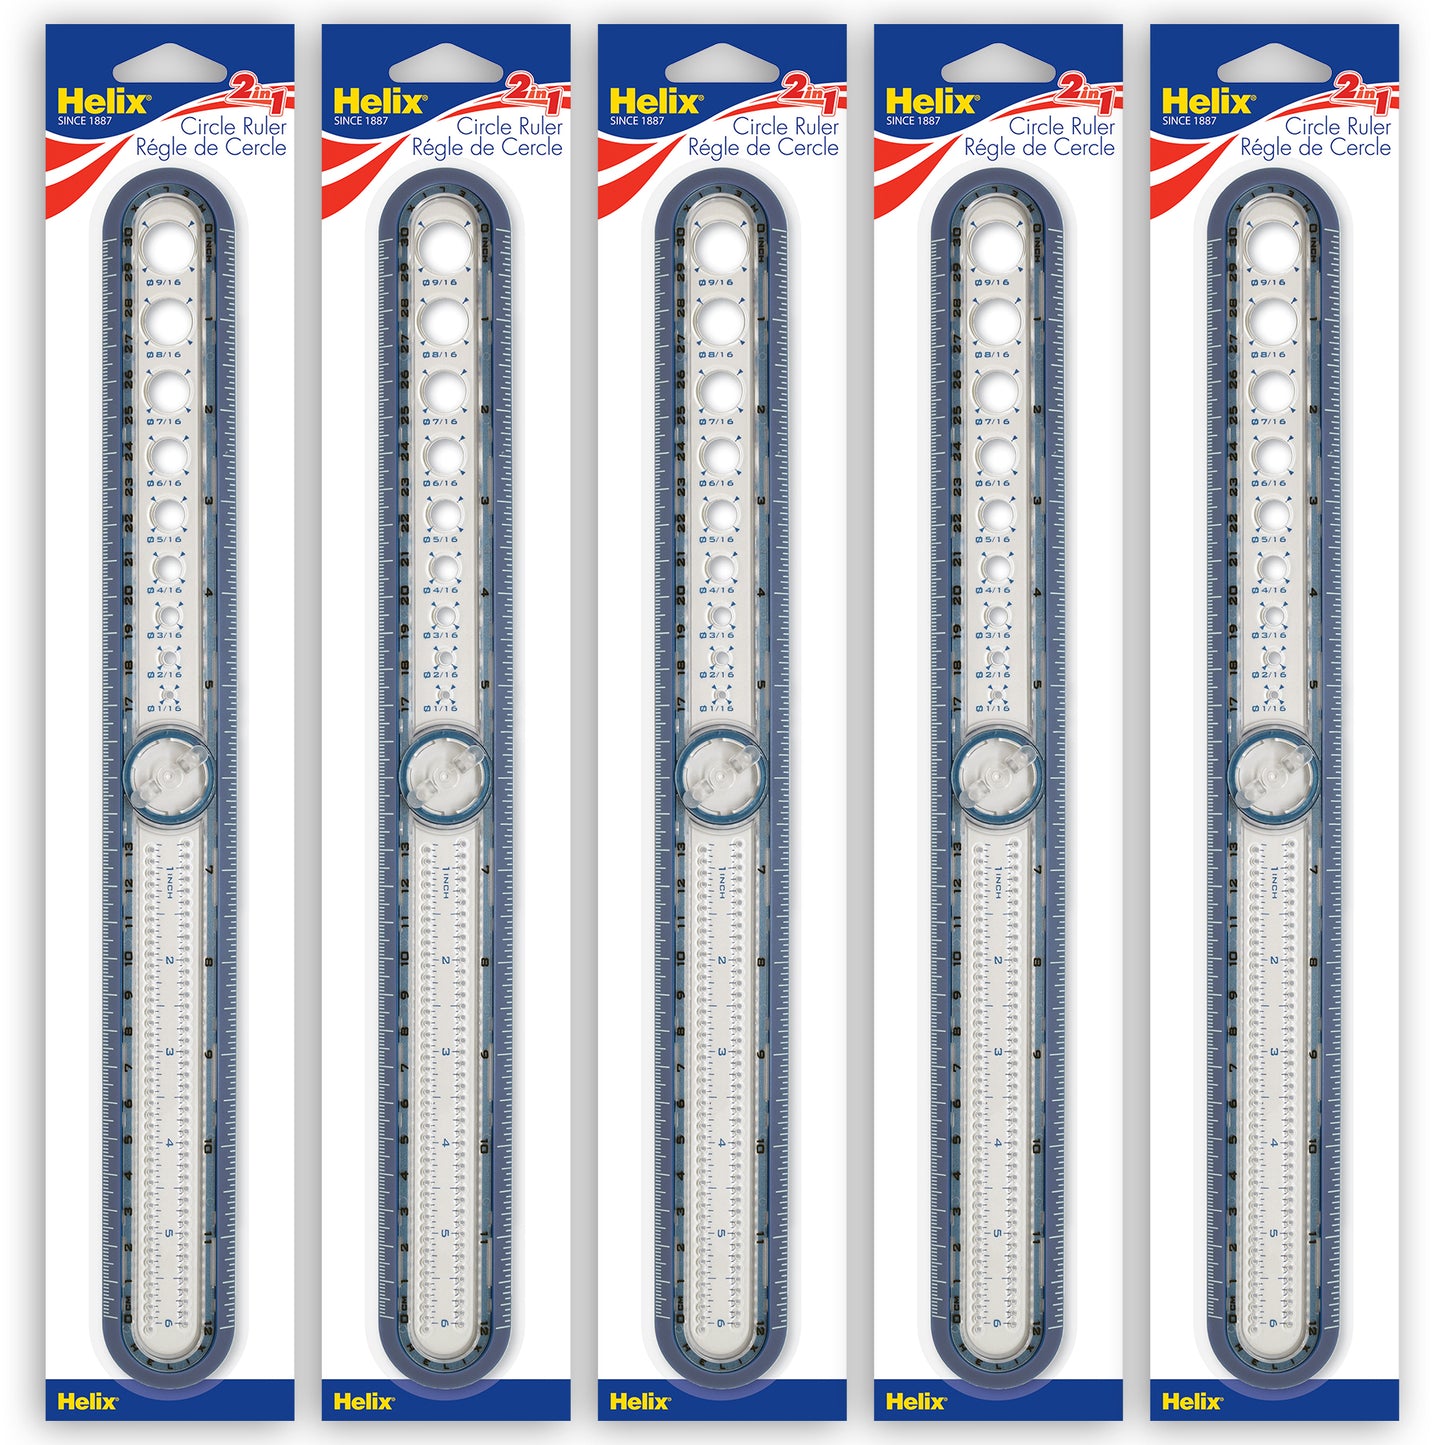 2-in-1 Circle Ruler Measuring & Compass Tool 12" / 30cm, Pack of 5